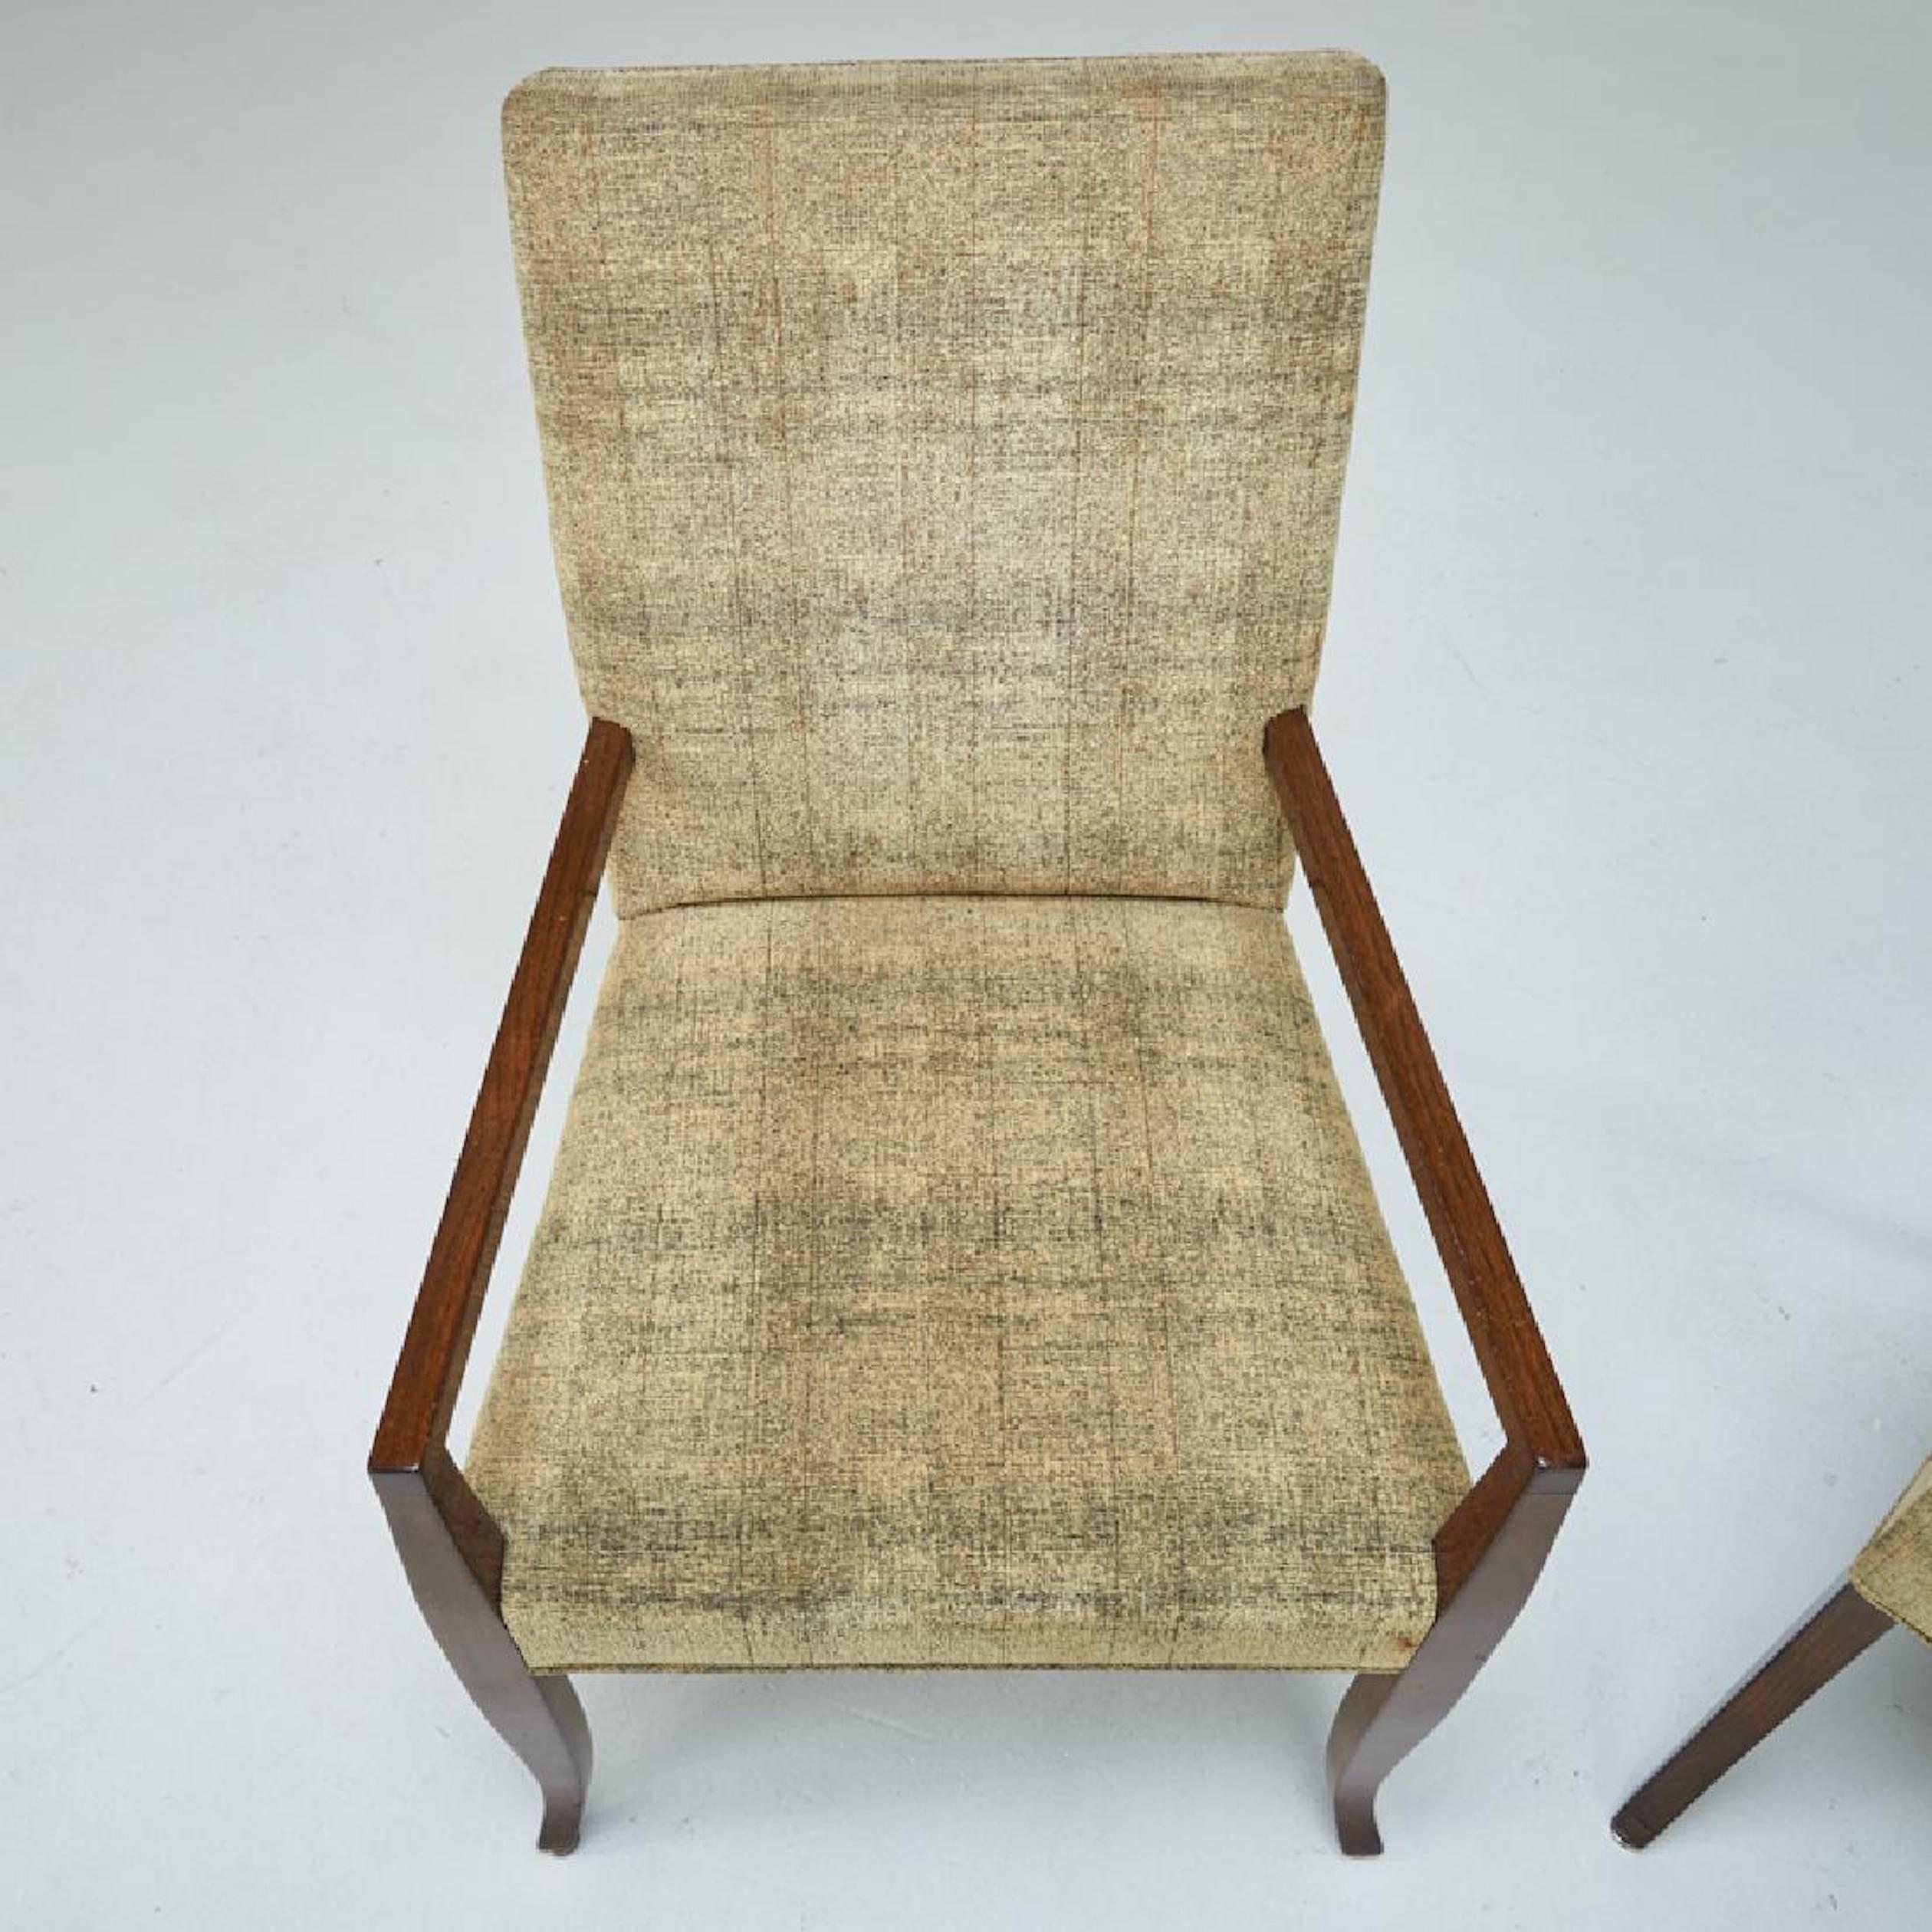 Six T. H. Robsjohn-Gibbings dining chairs, Consisting of 2 Arm & 4 Side Chairs
hard to find comfortable upholstered backrest and seat dining chairs consisting of two armchairs 37.5